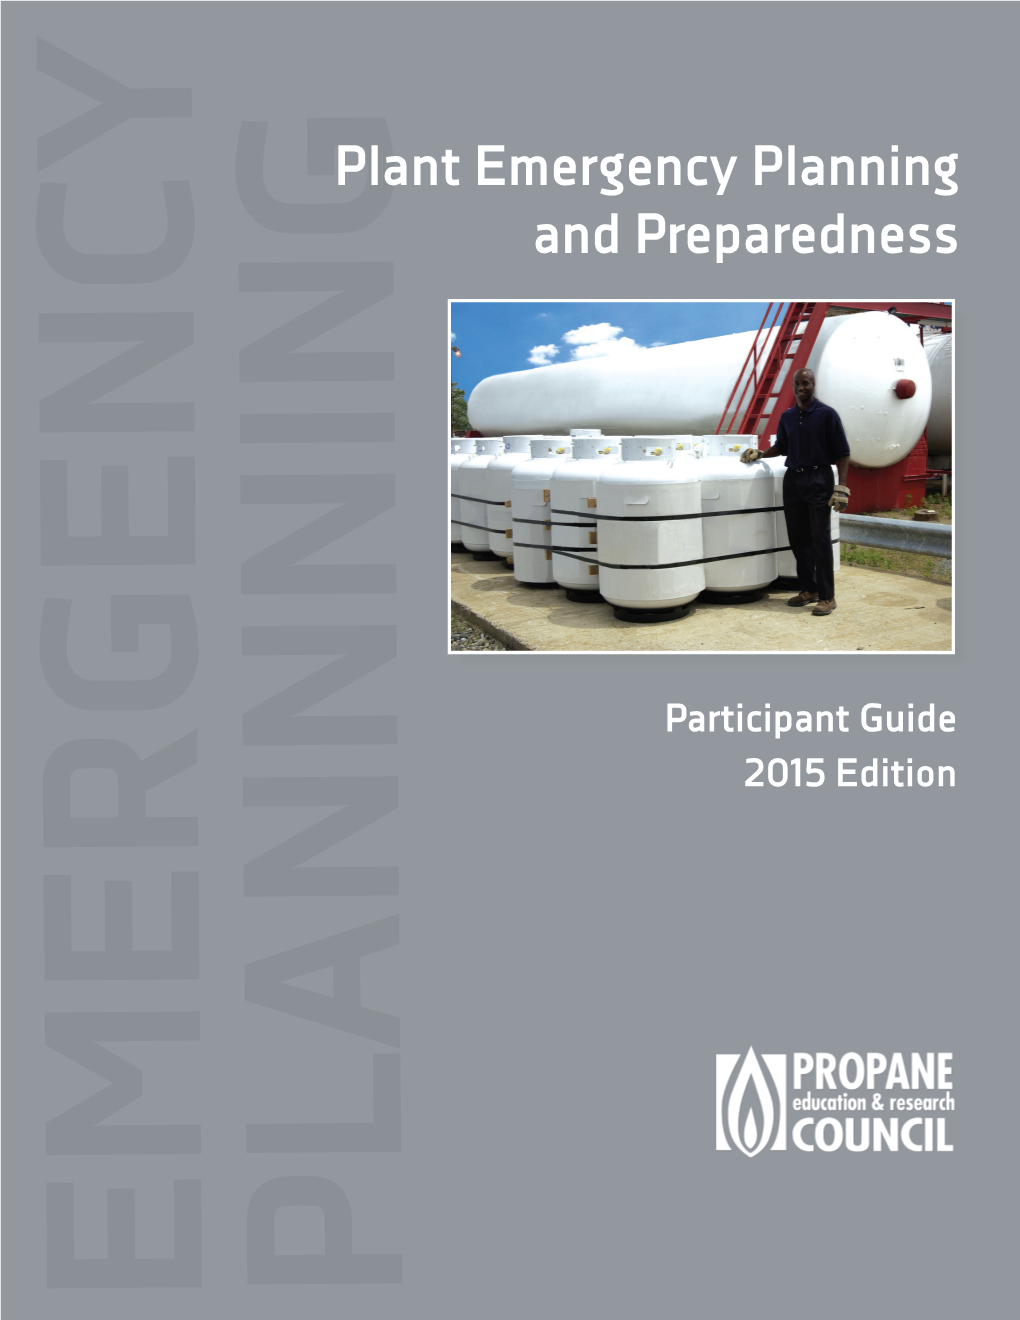 Plant Emergency Planning and Preparedness Manual